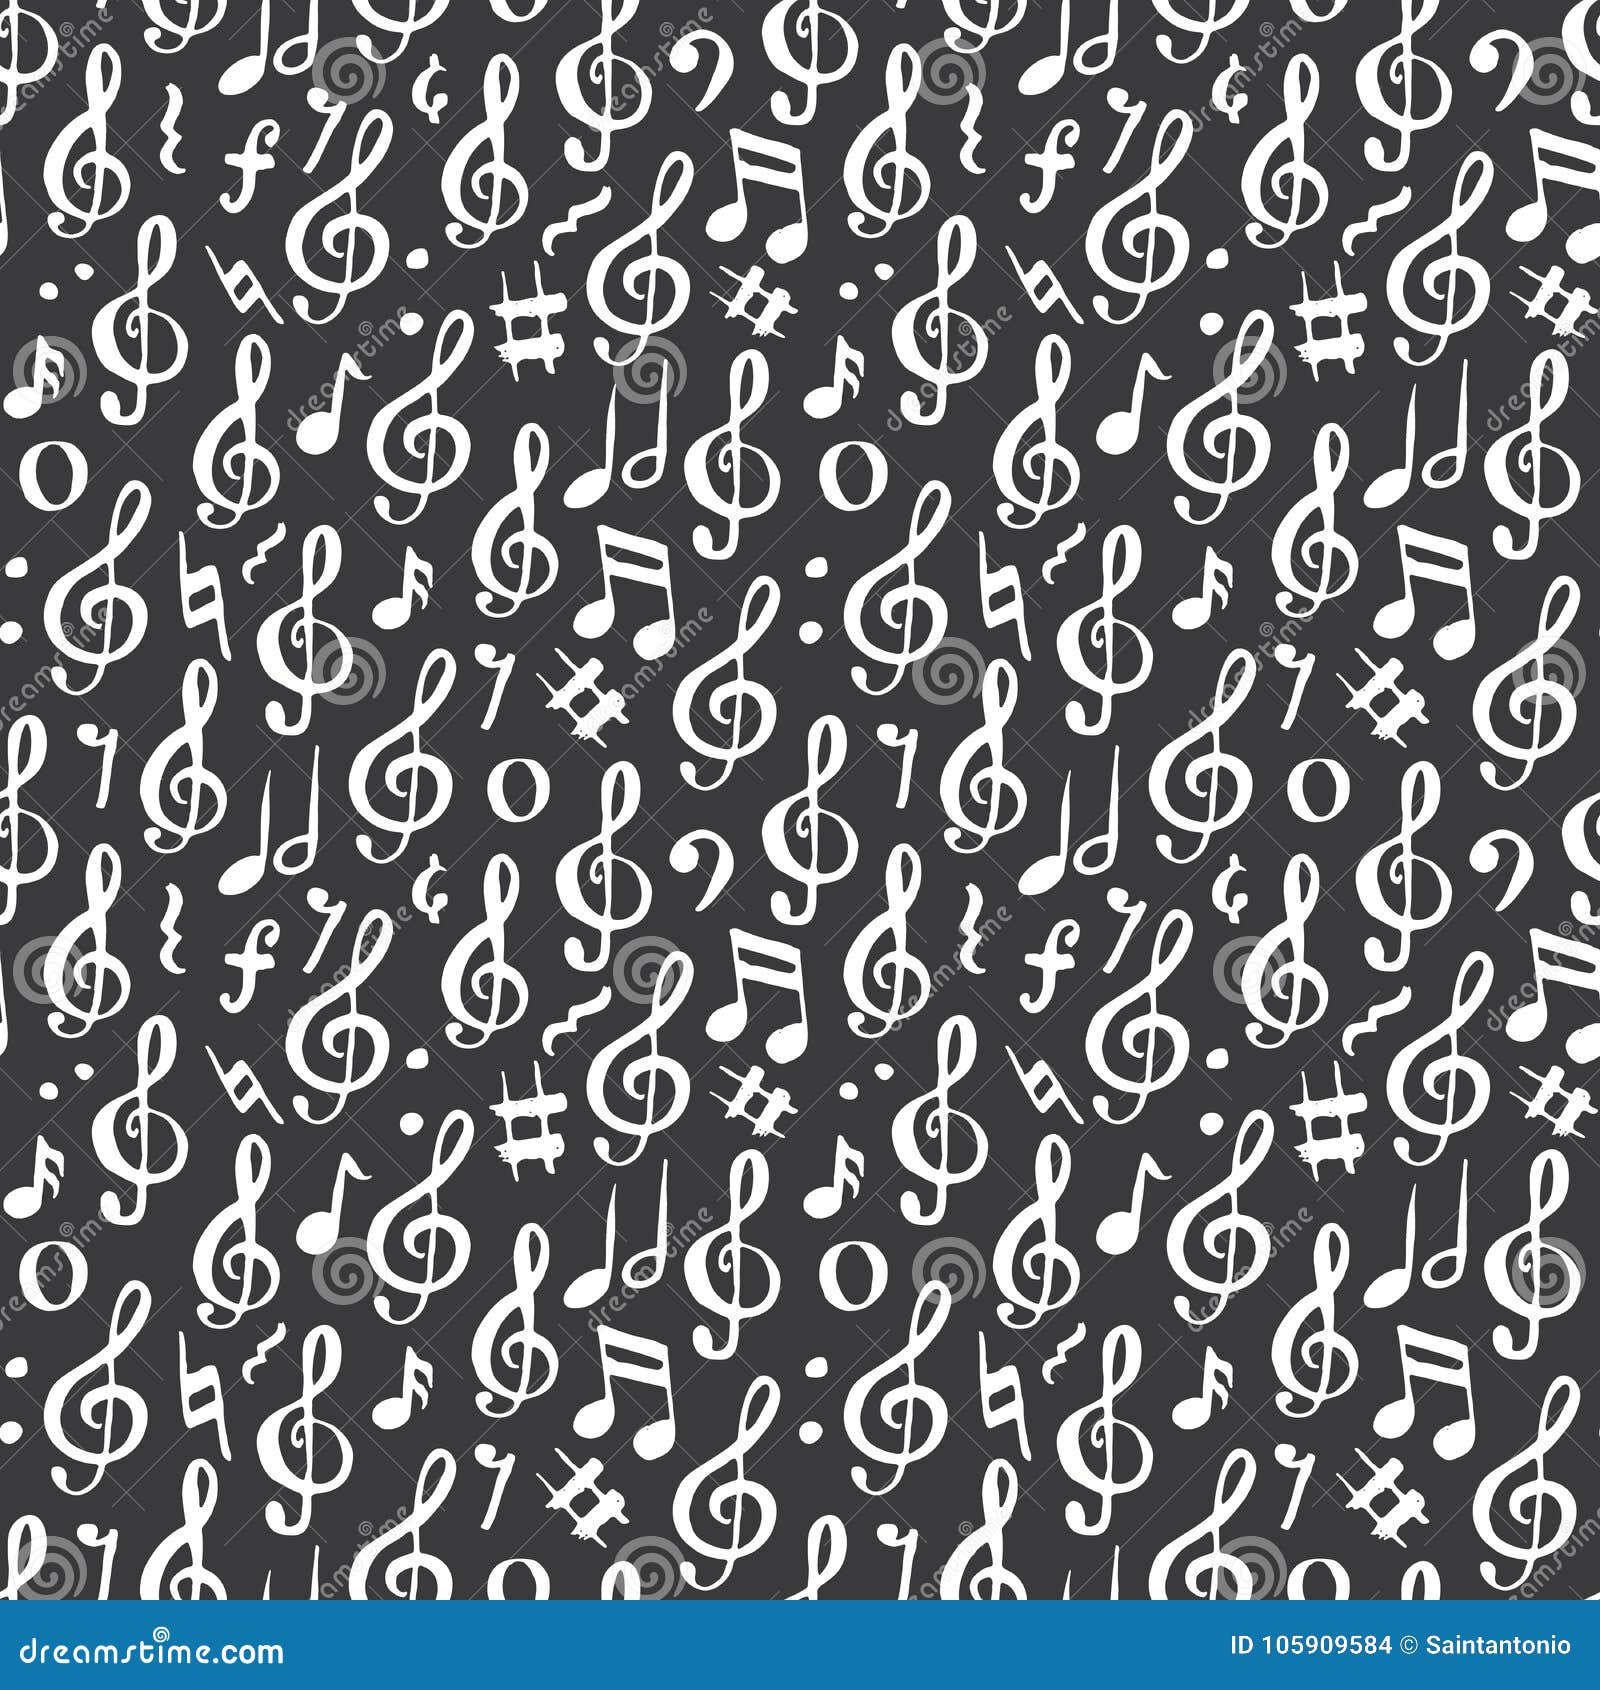 Music Note Seamless Pattern Vector Illustration. Hand Drawn Sketched ...